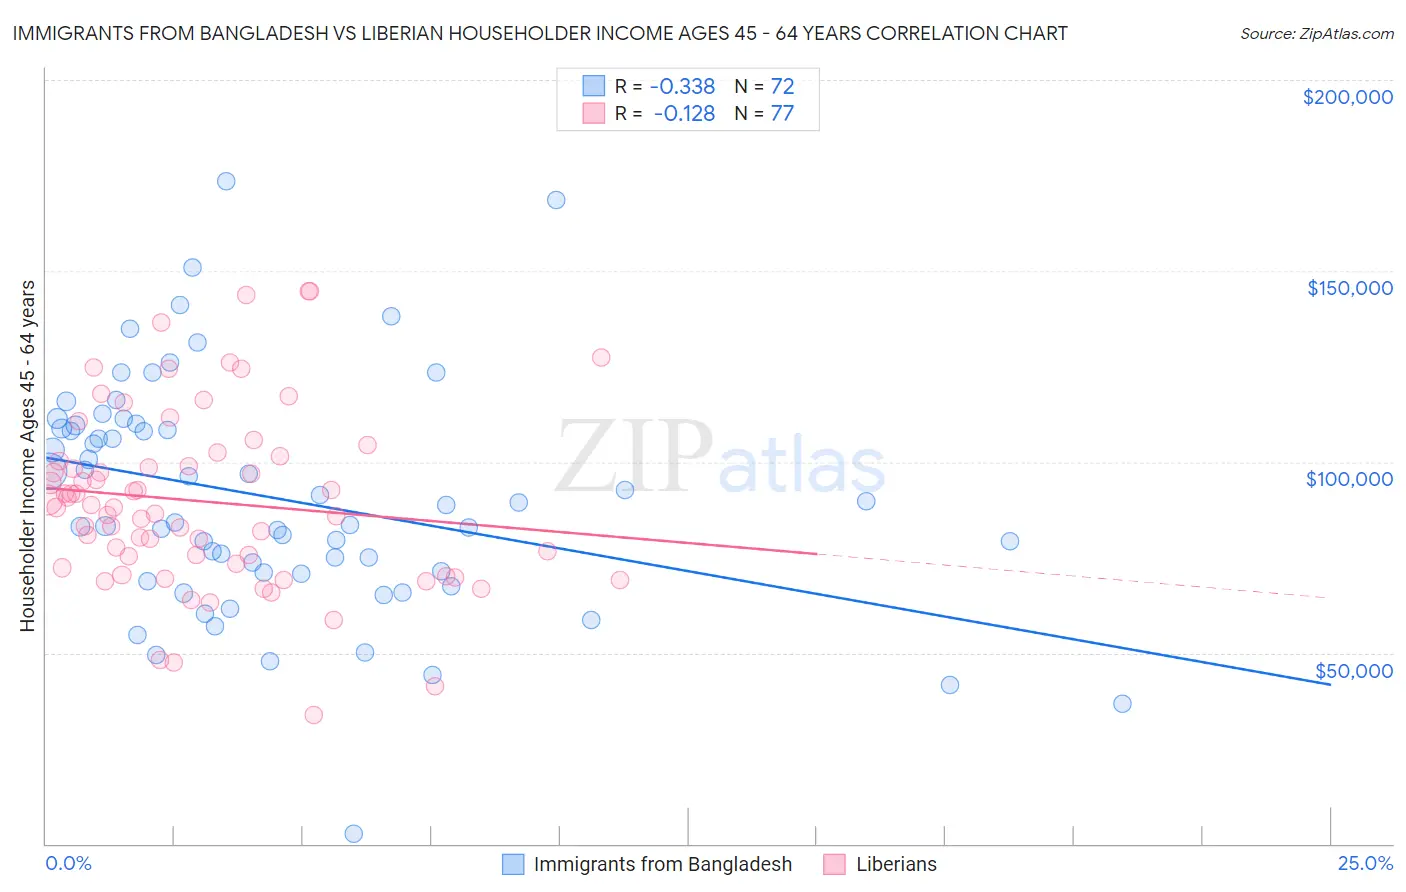 Immigrants from Bangladesh vs Liberian Householder Income Ages 45 - 64 years